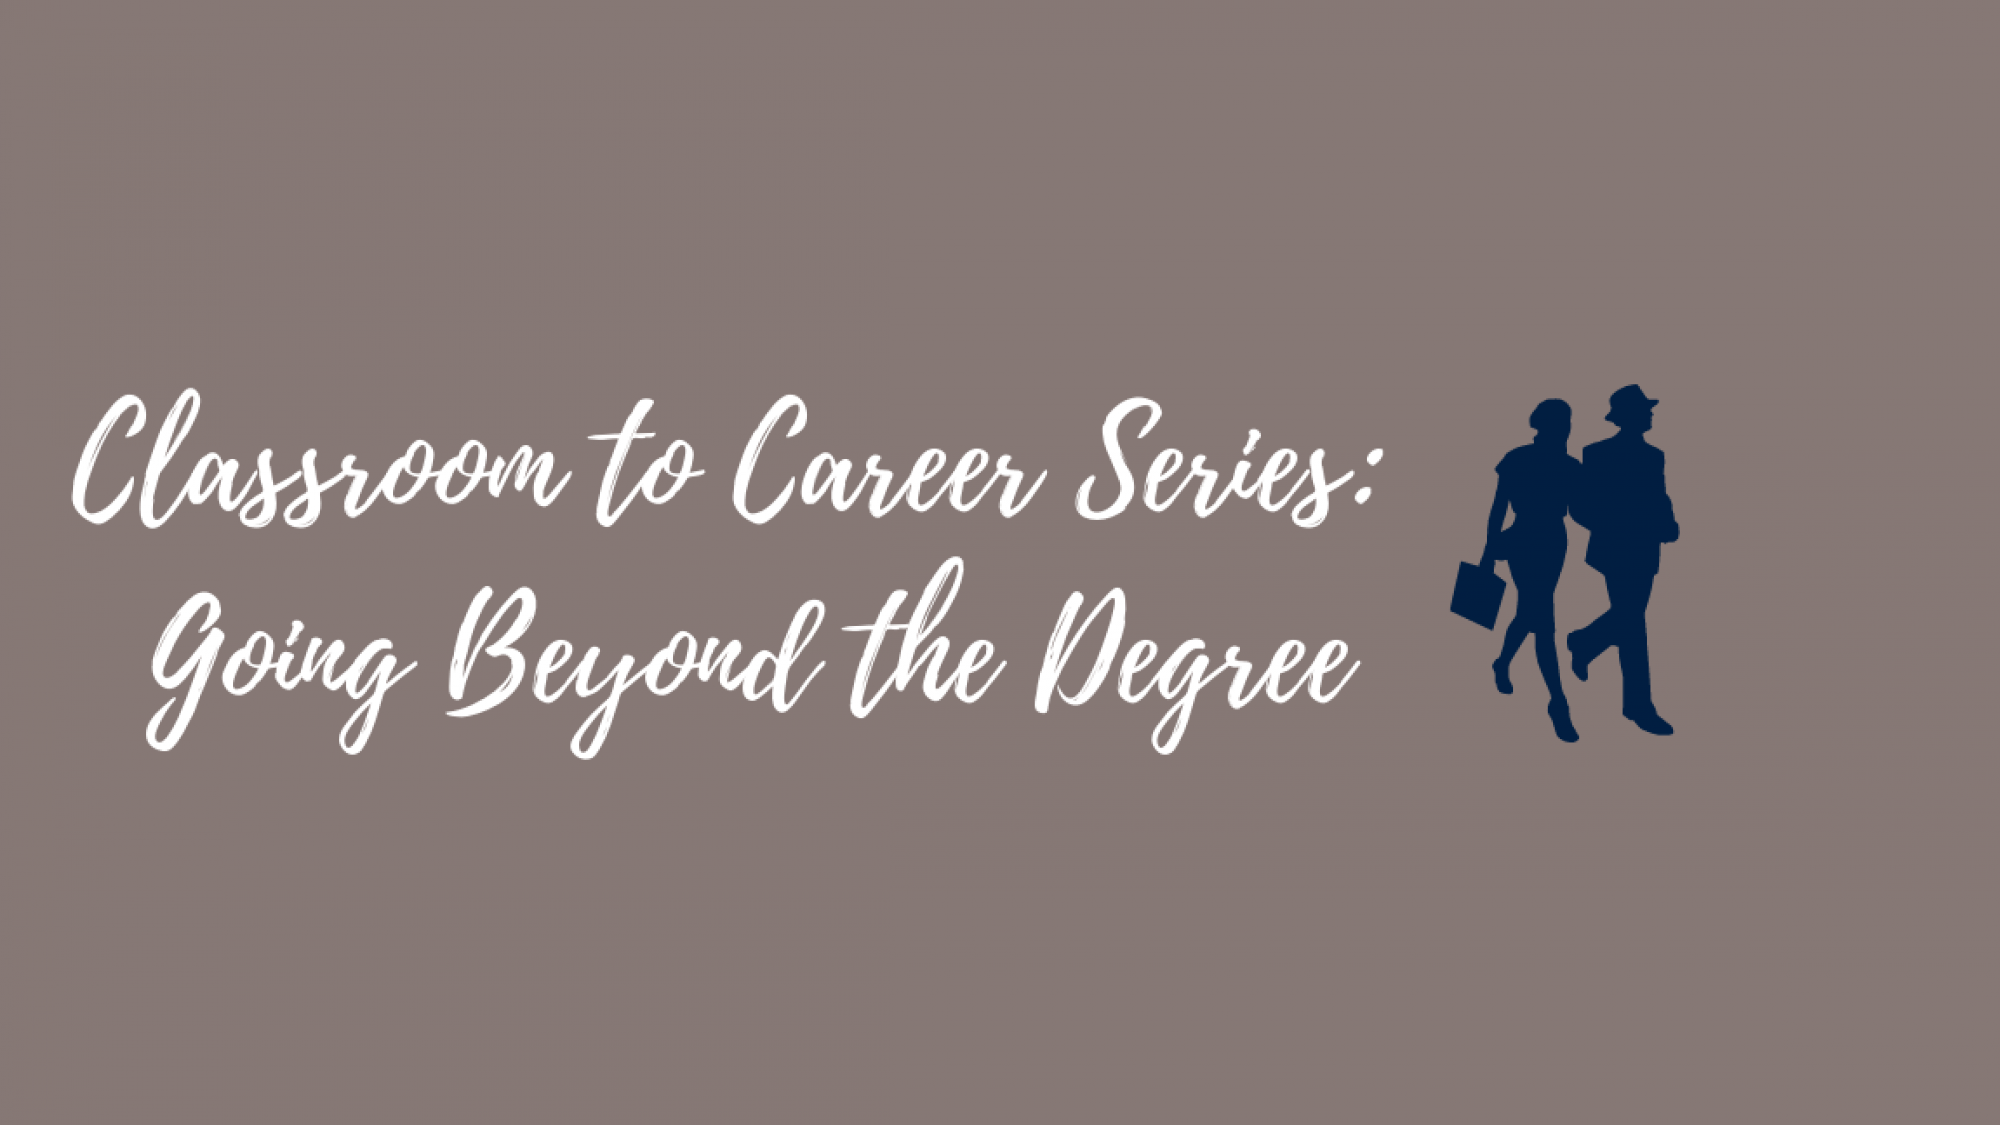 Grey background with blue text overlay reading—Classroom to Career Series: Going Beyond the Degree—with two silhouettes standing side-by-side carrying briefcases